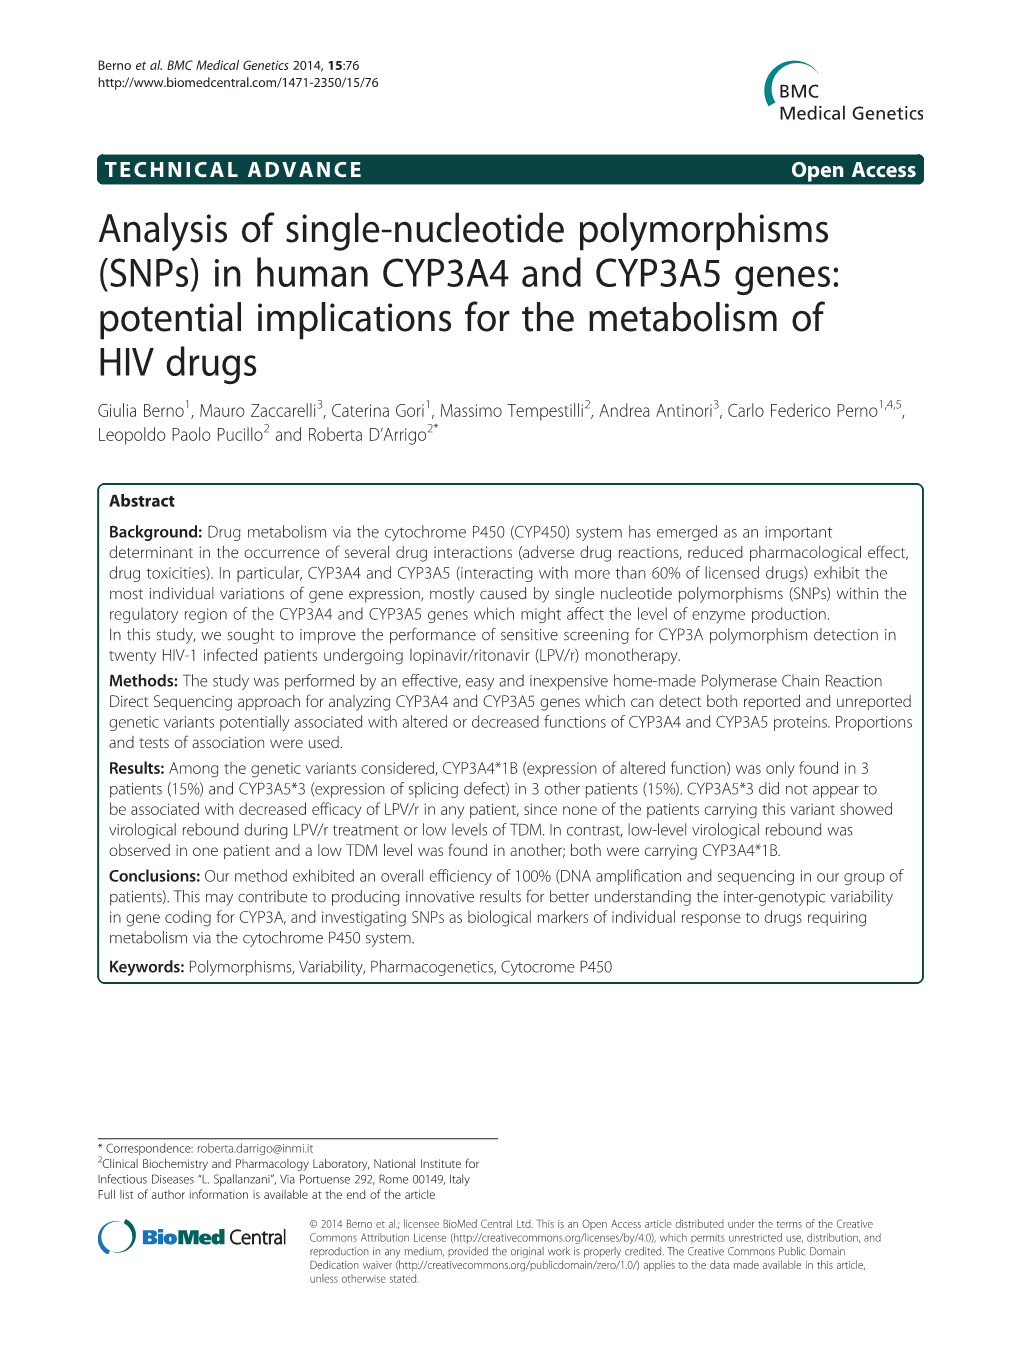 Analysis of Single-Nucleotide Polymorphisms (Snps) in Human